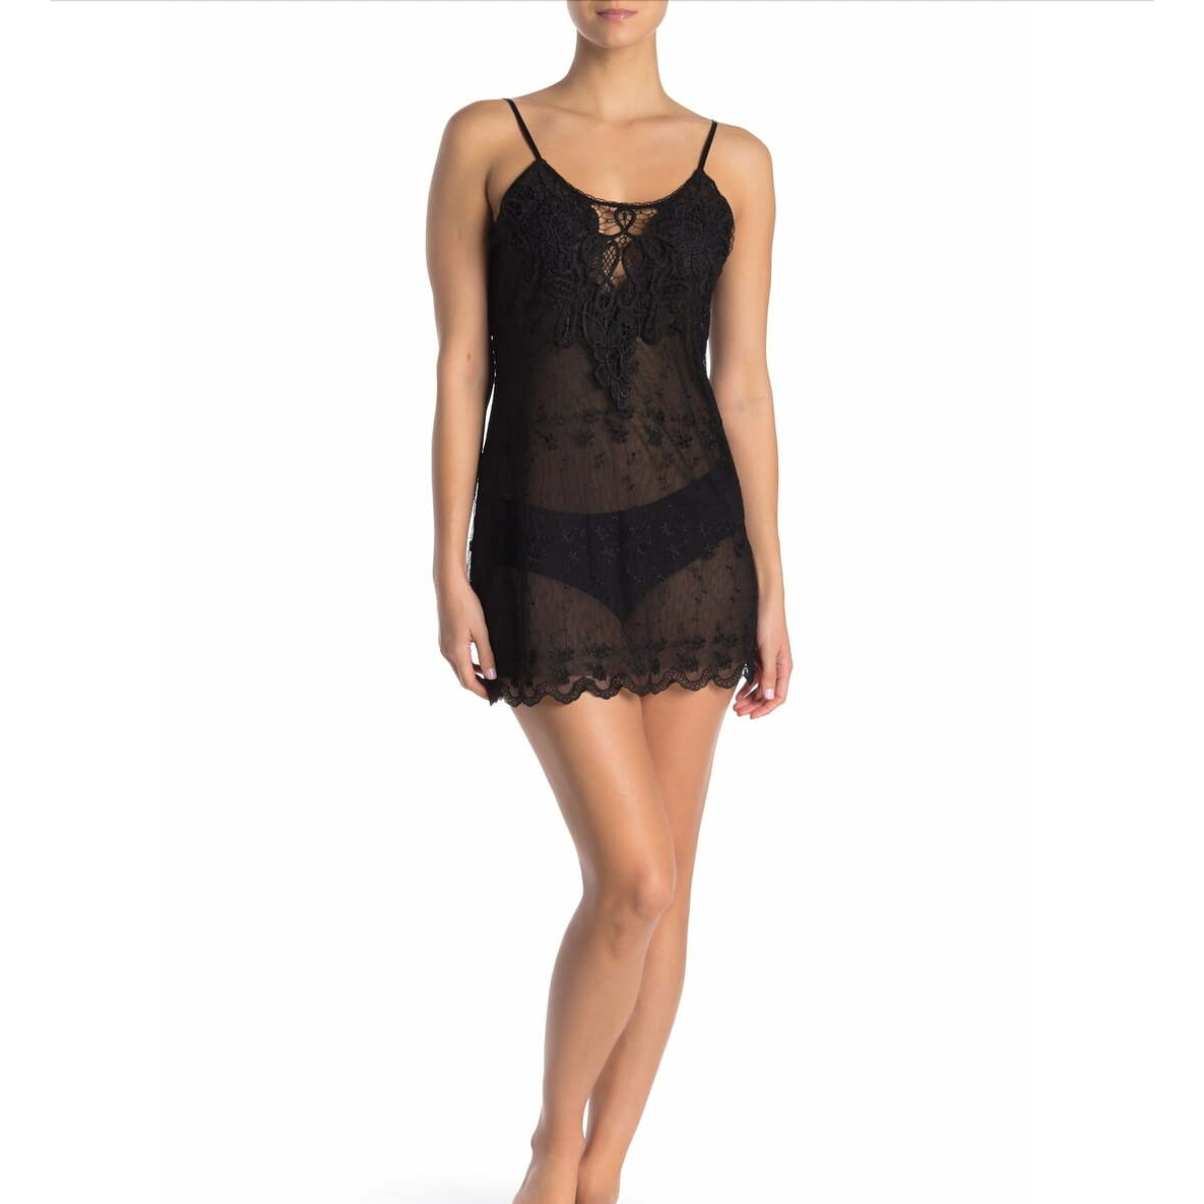 In Bloom by Jonquil Crochet Lace Knit Chemise – tinademel